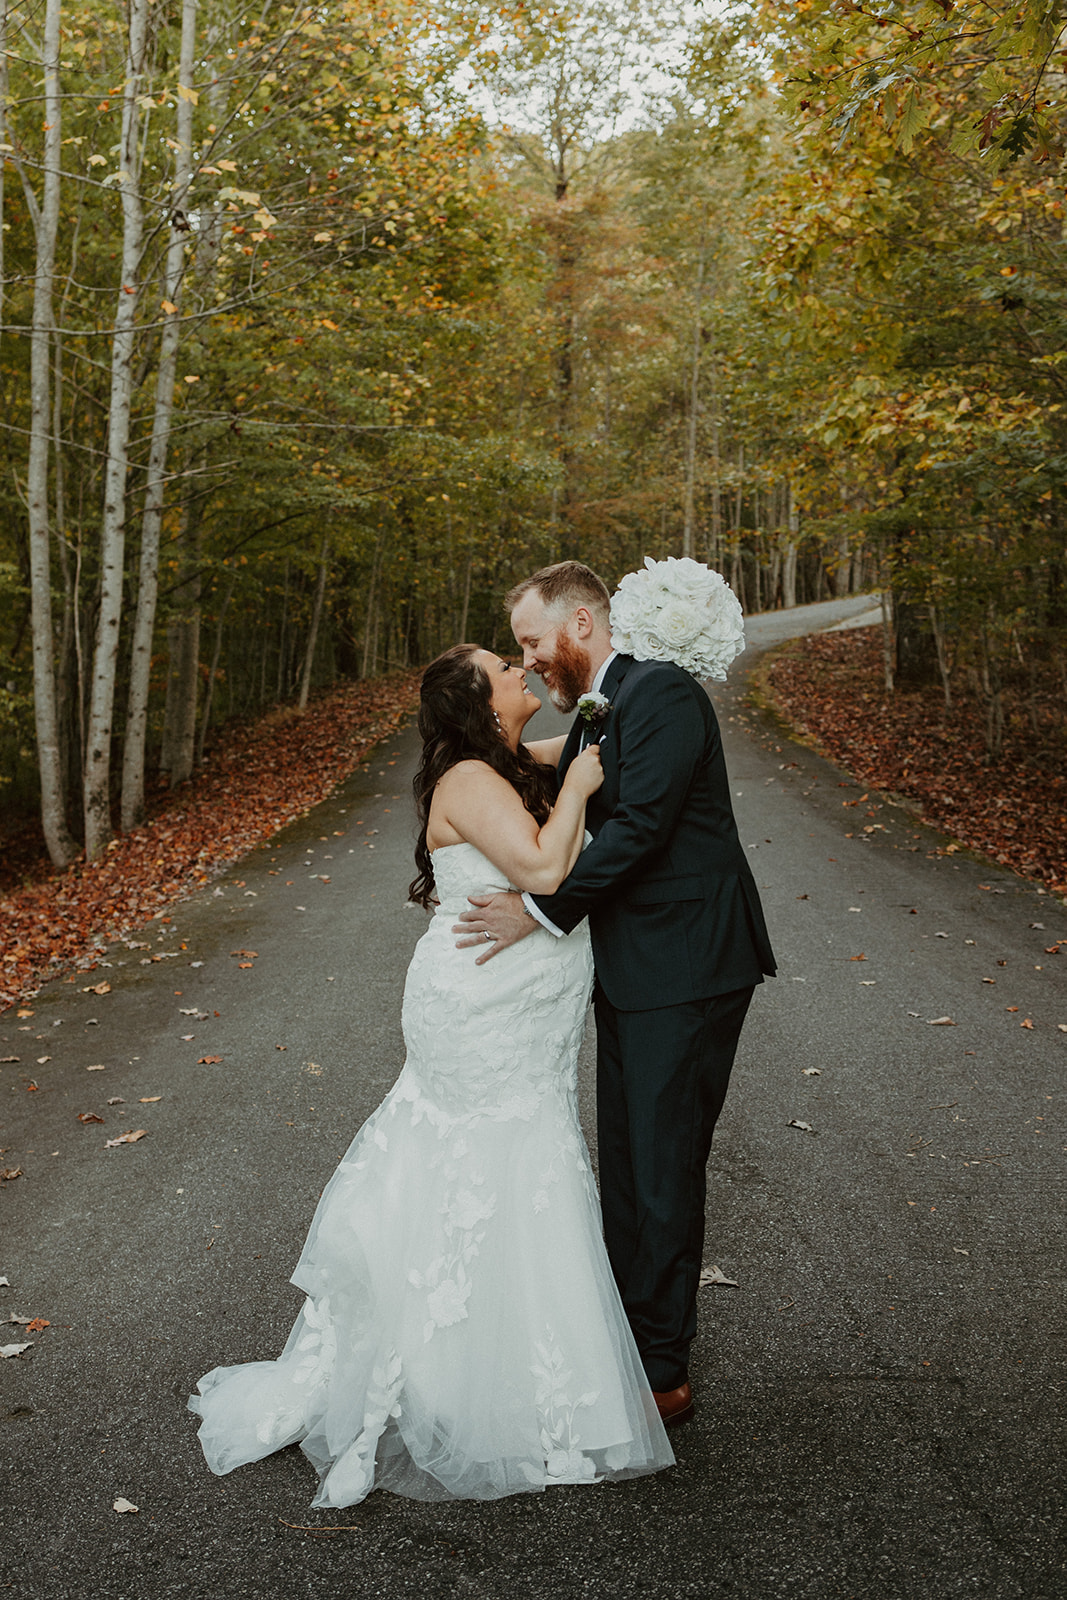 wedding couple in the fall trees at their airbnb wedding venue